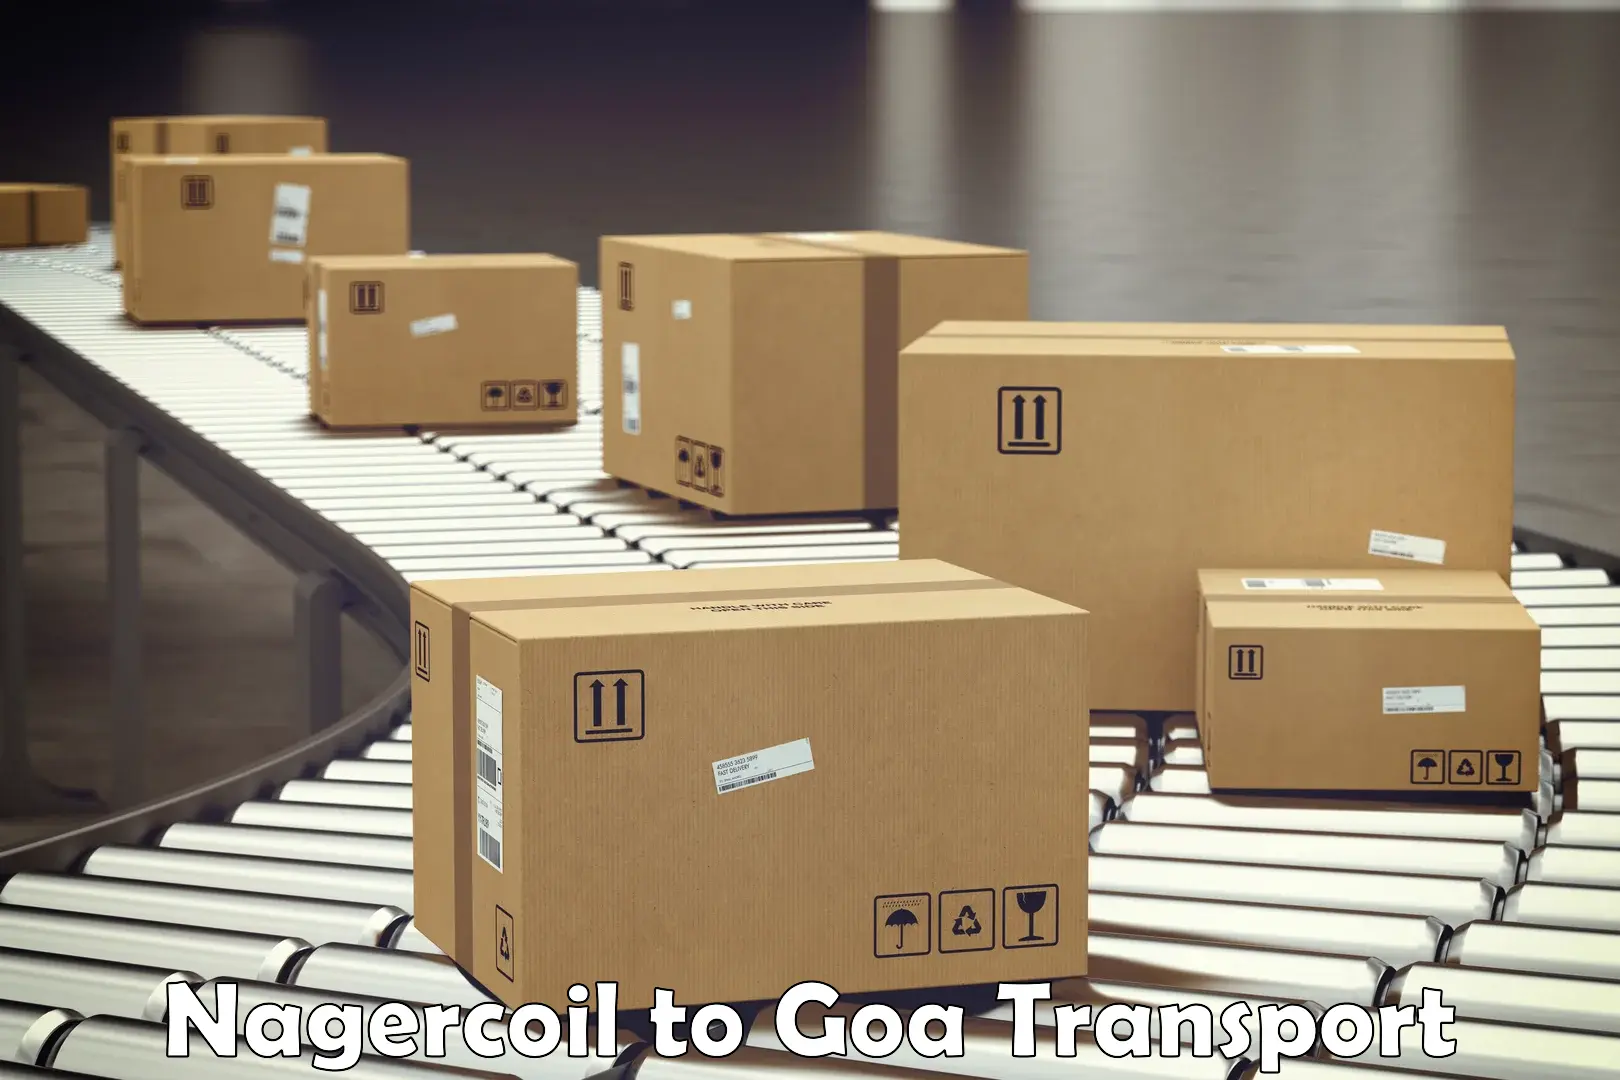 Luggage transport services Nagercoil to Vasco da Gama